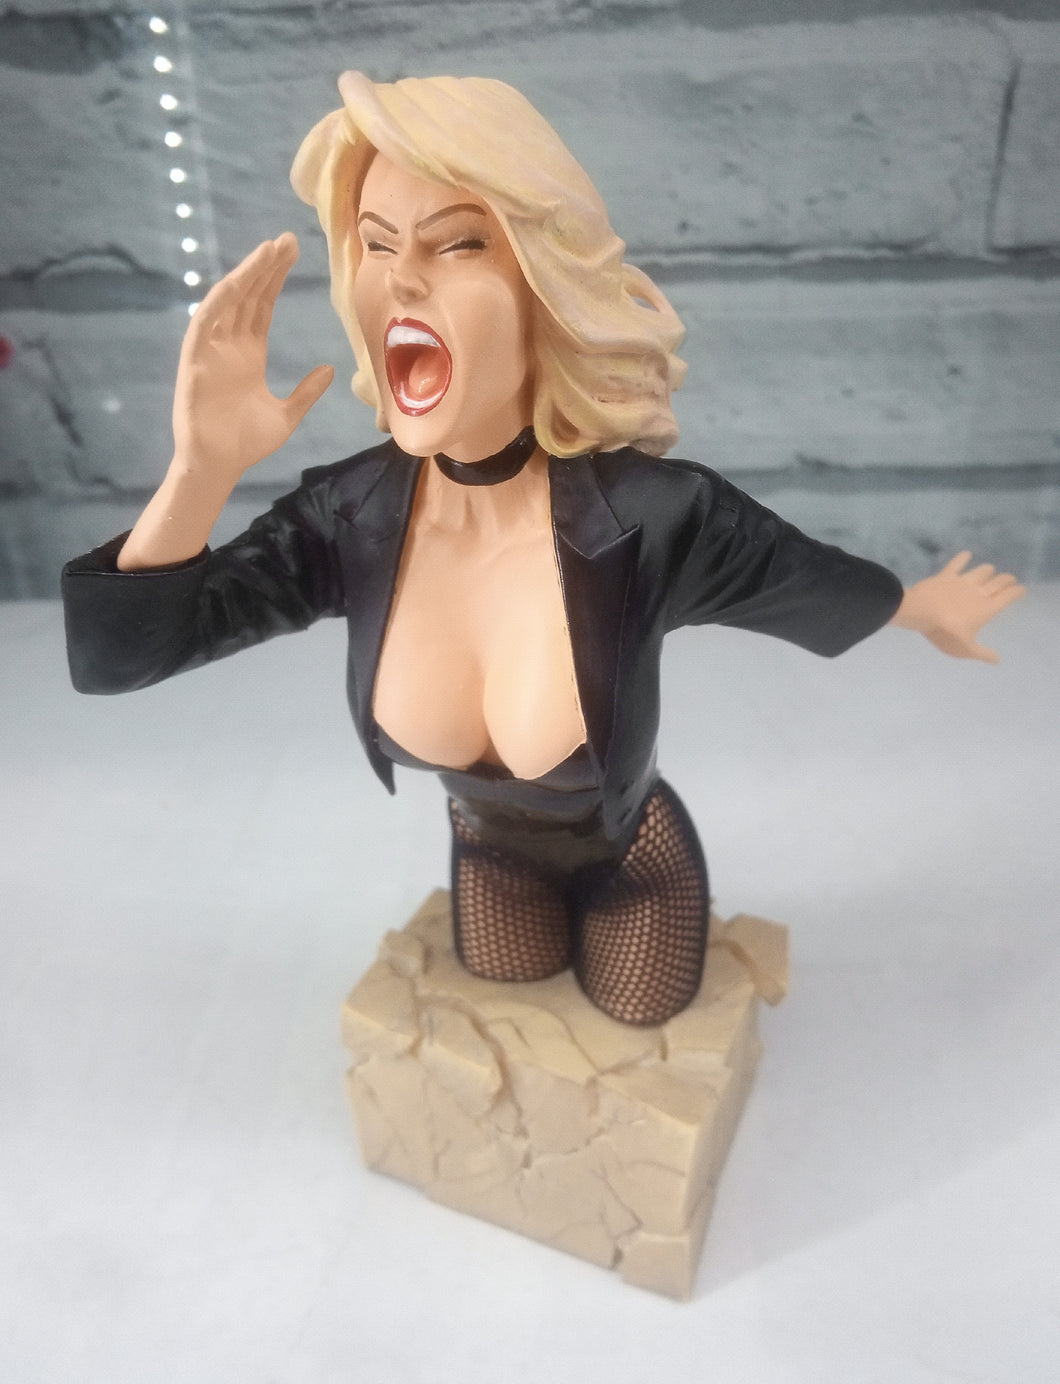 WOMEN OF THE DC UNIVERSE BLACK CANARY BUST